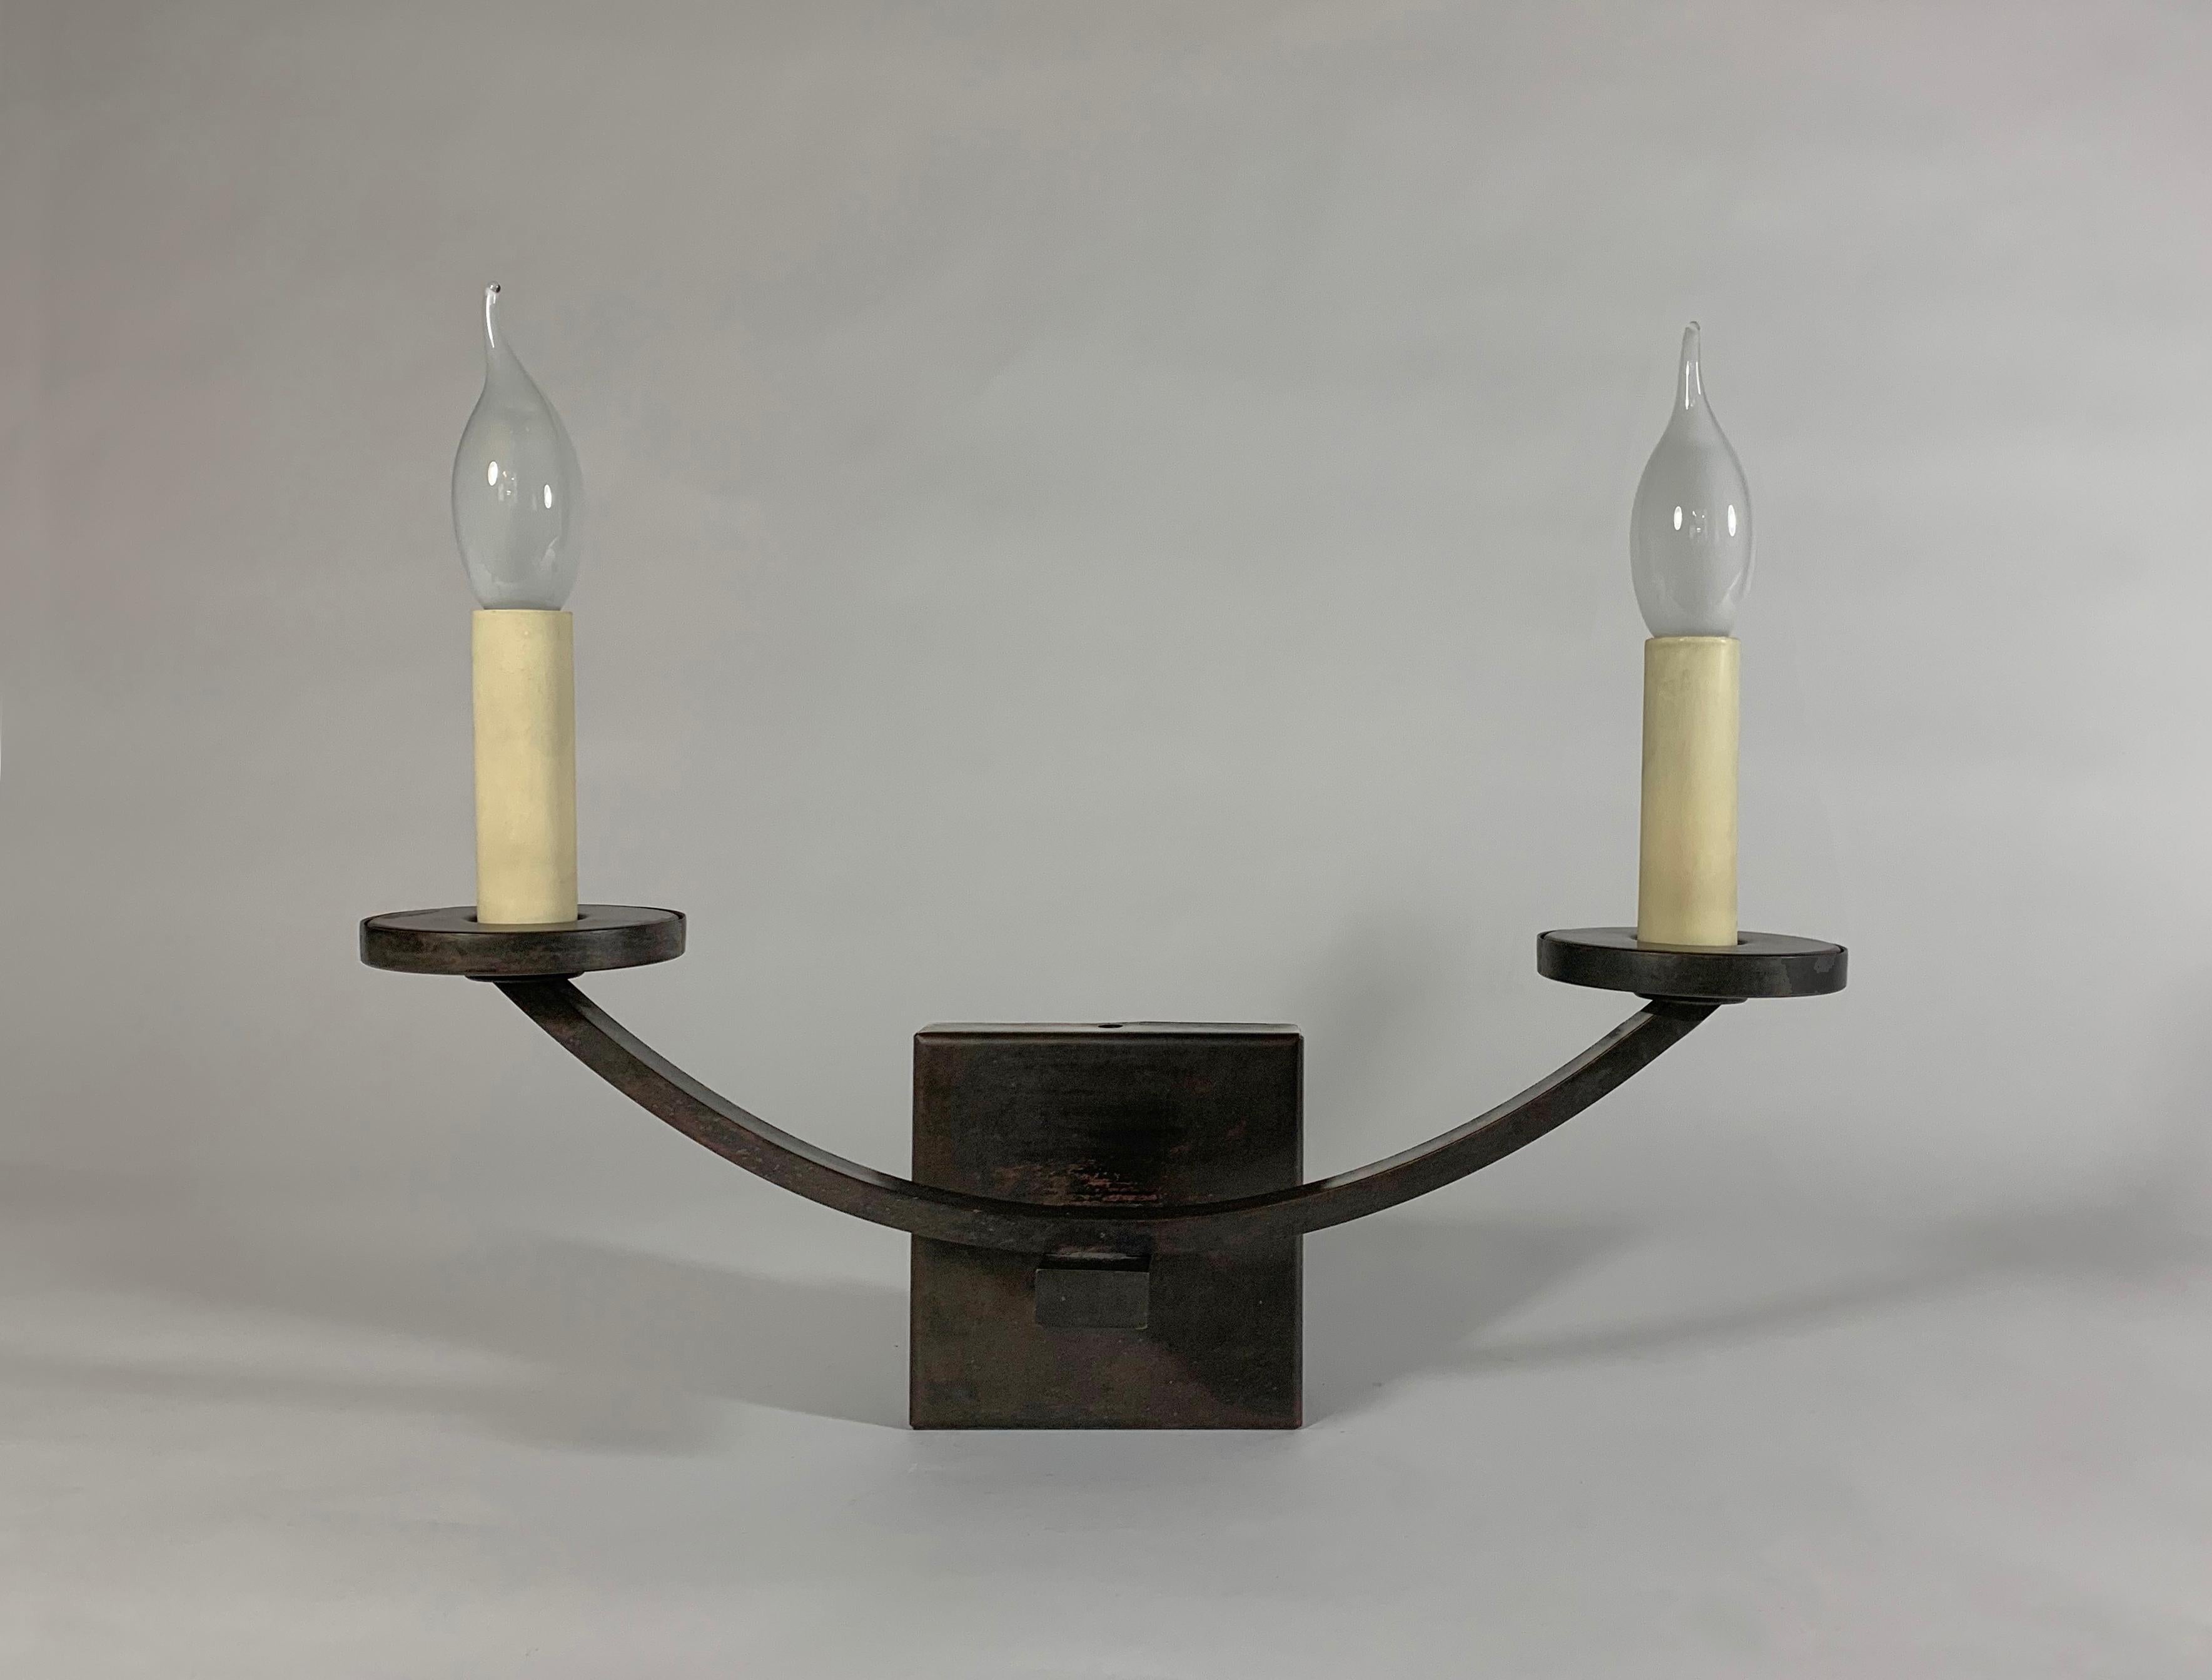 A traditional 2-candle brass wall light with rustic bronze finish and card candles. Candelabra bulb holders.
Original prototype.